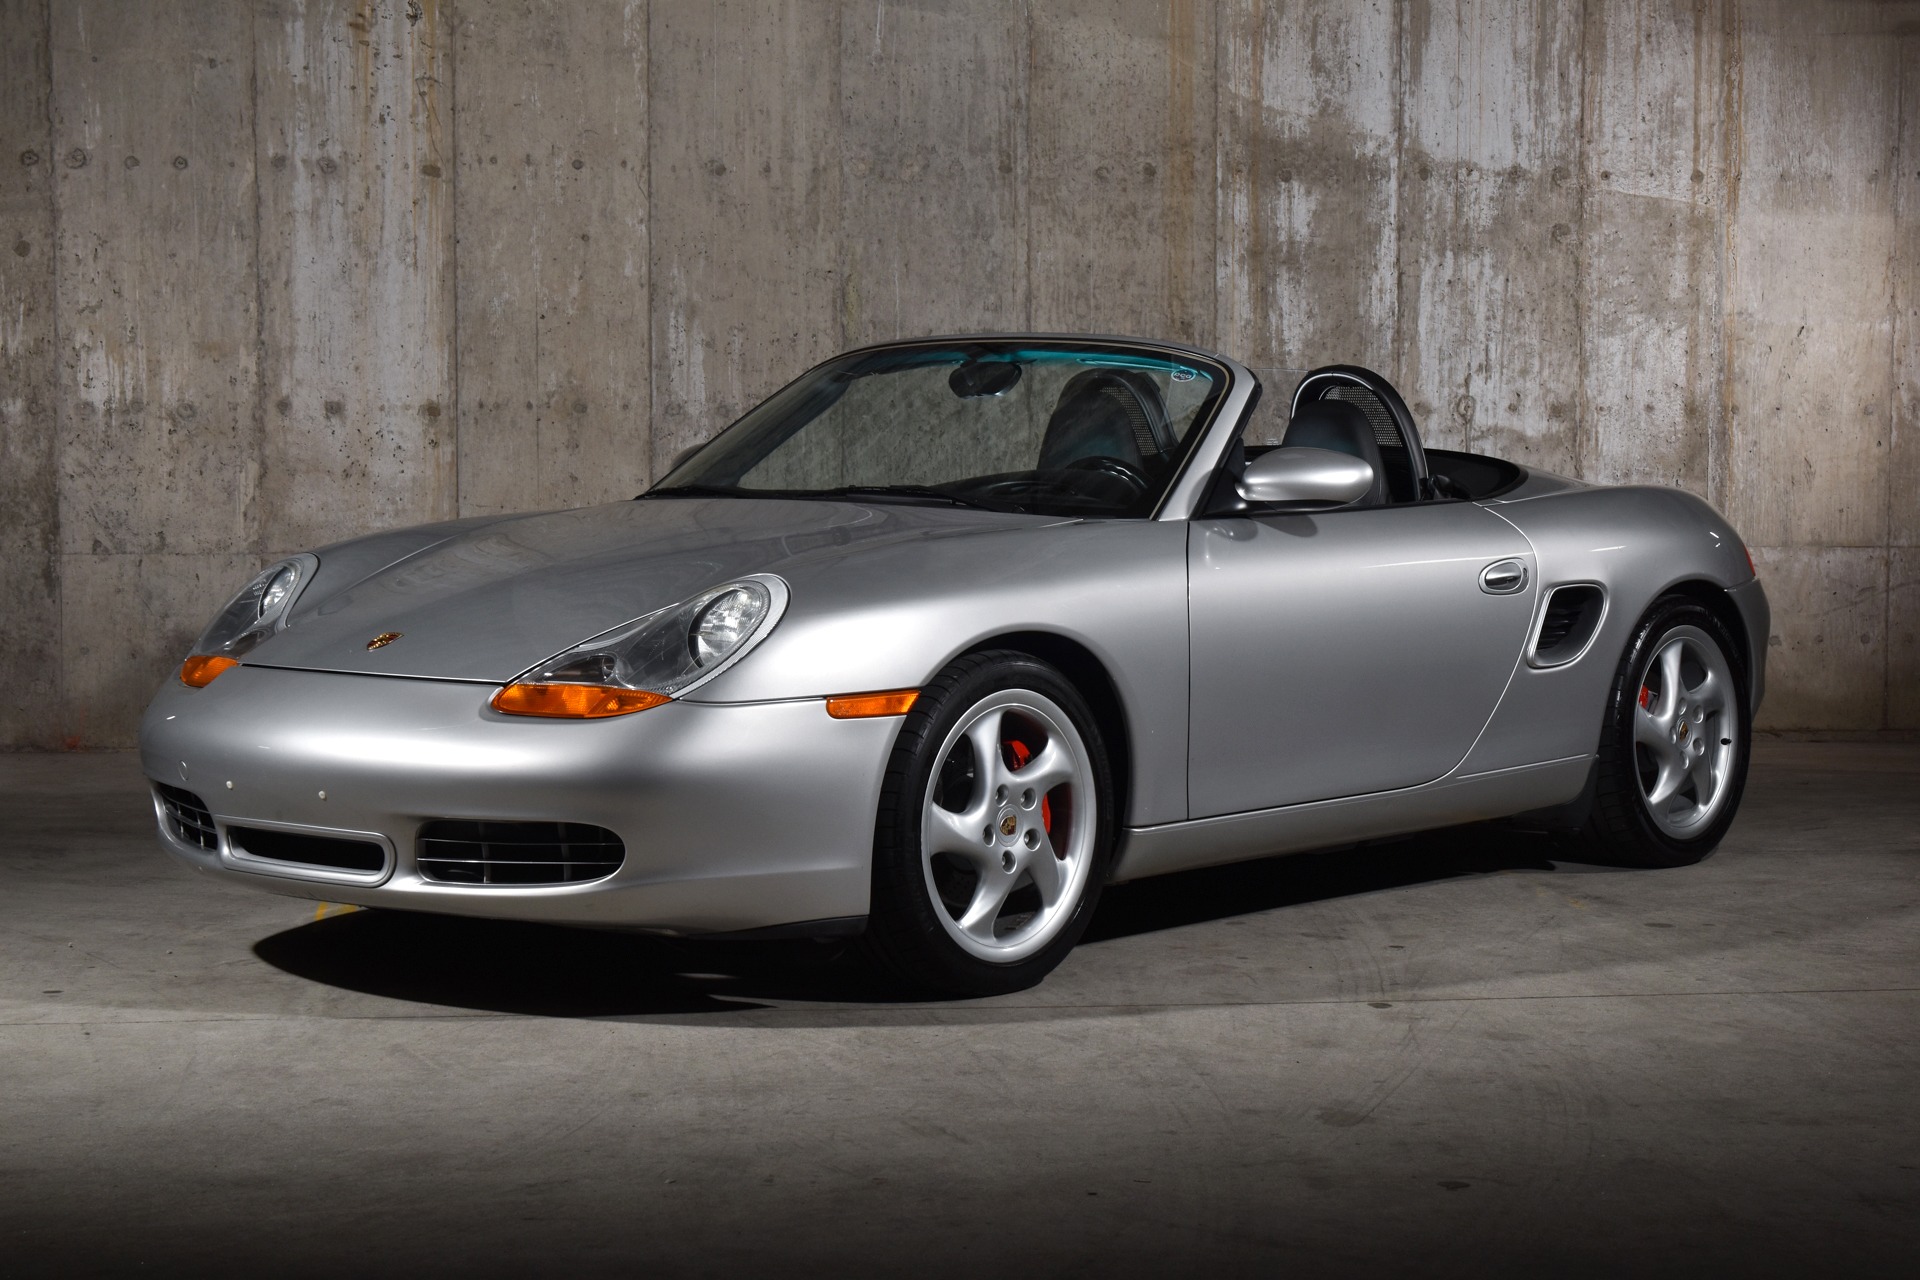 Porsche Boxster S (2001) – Specifications & Performance